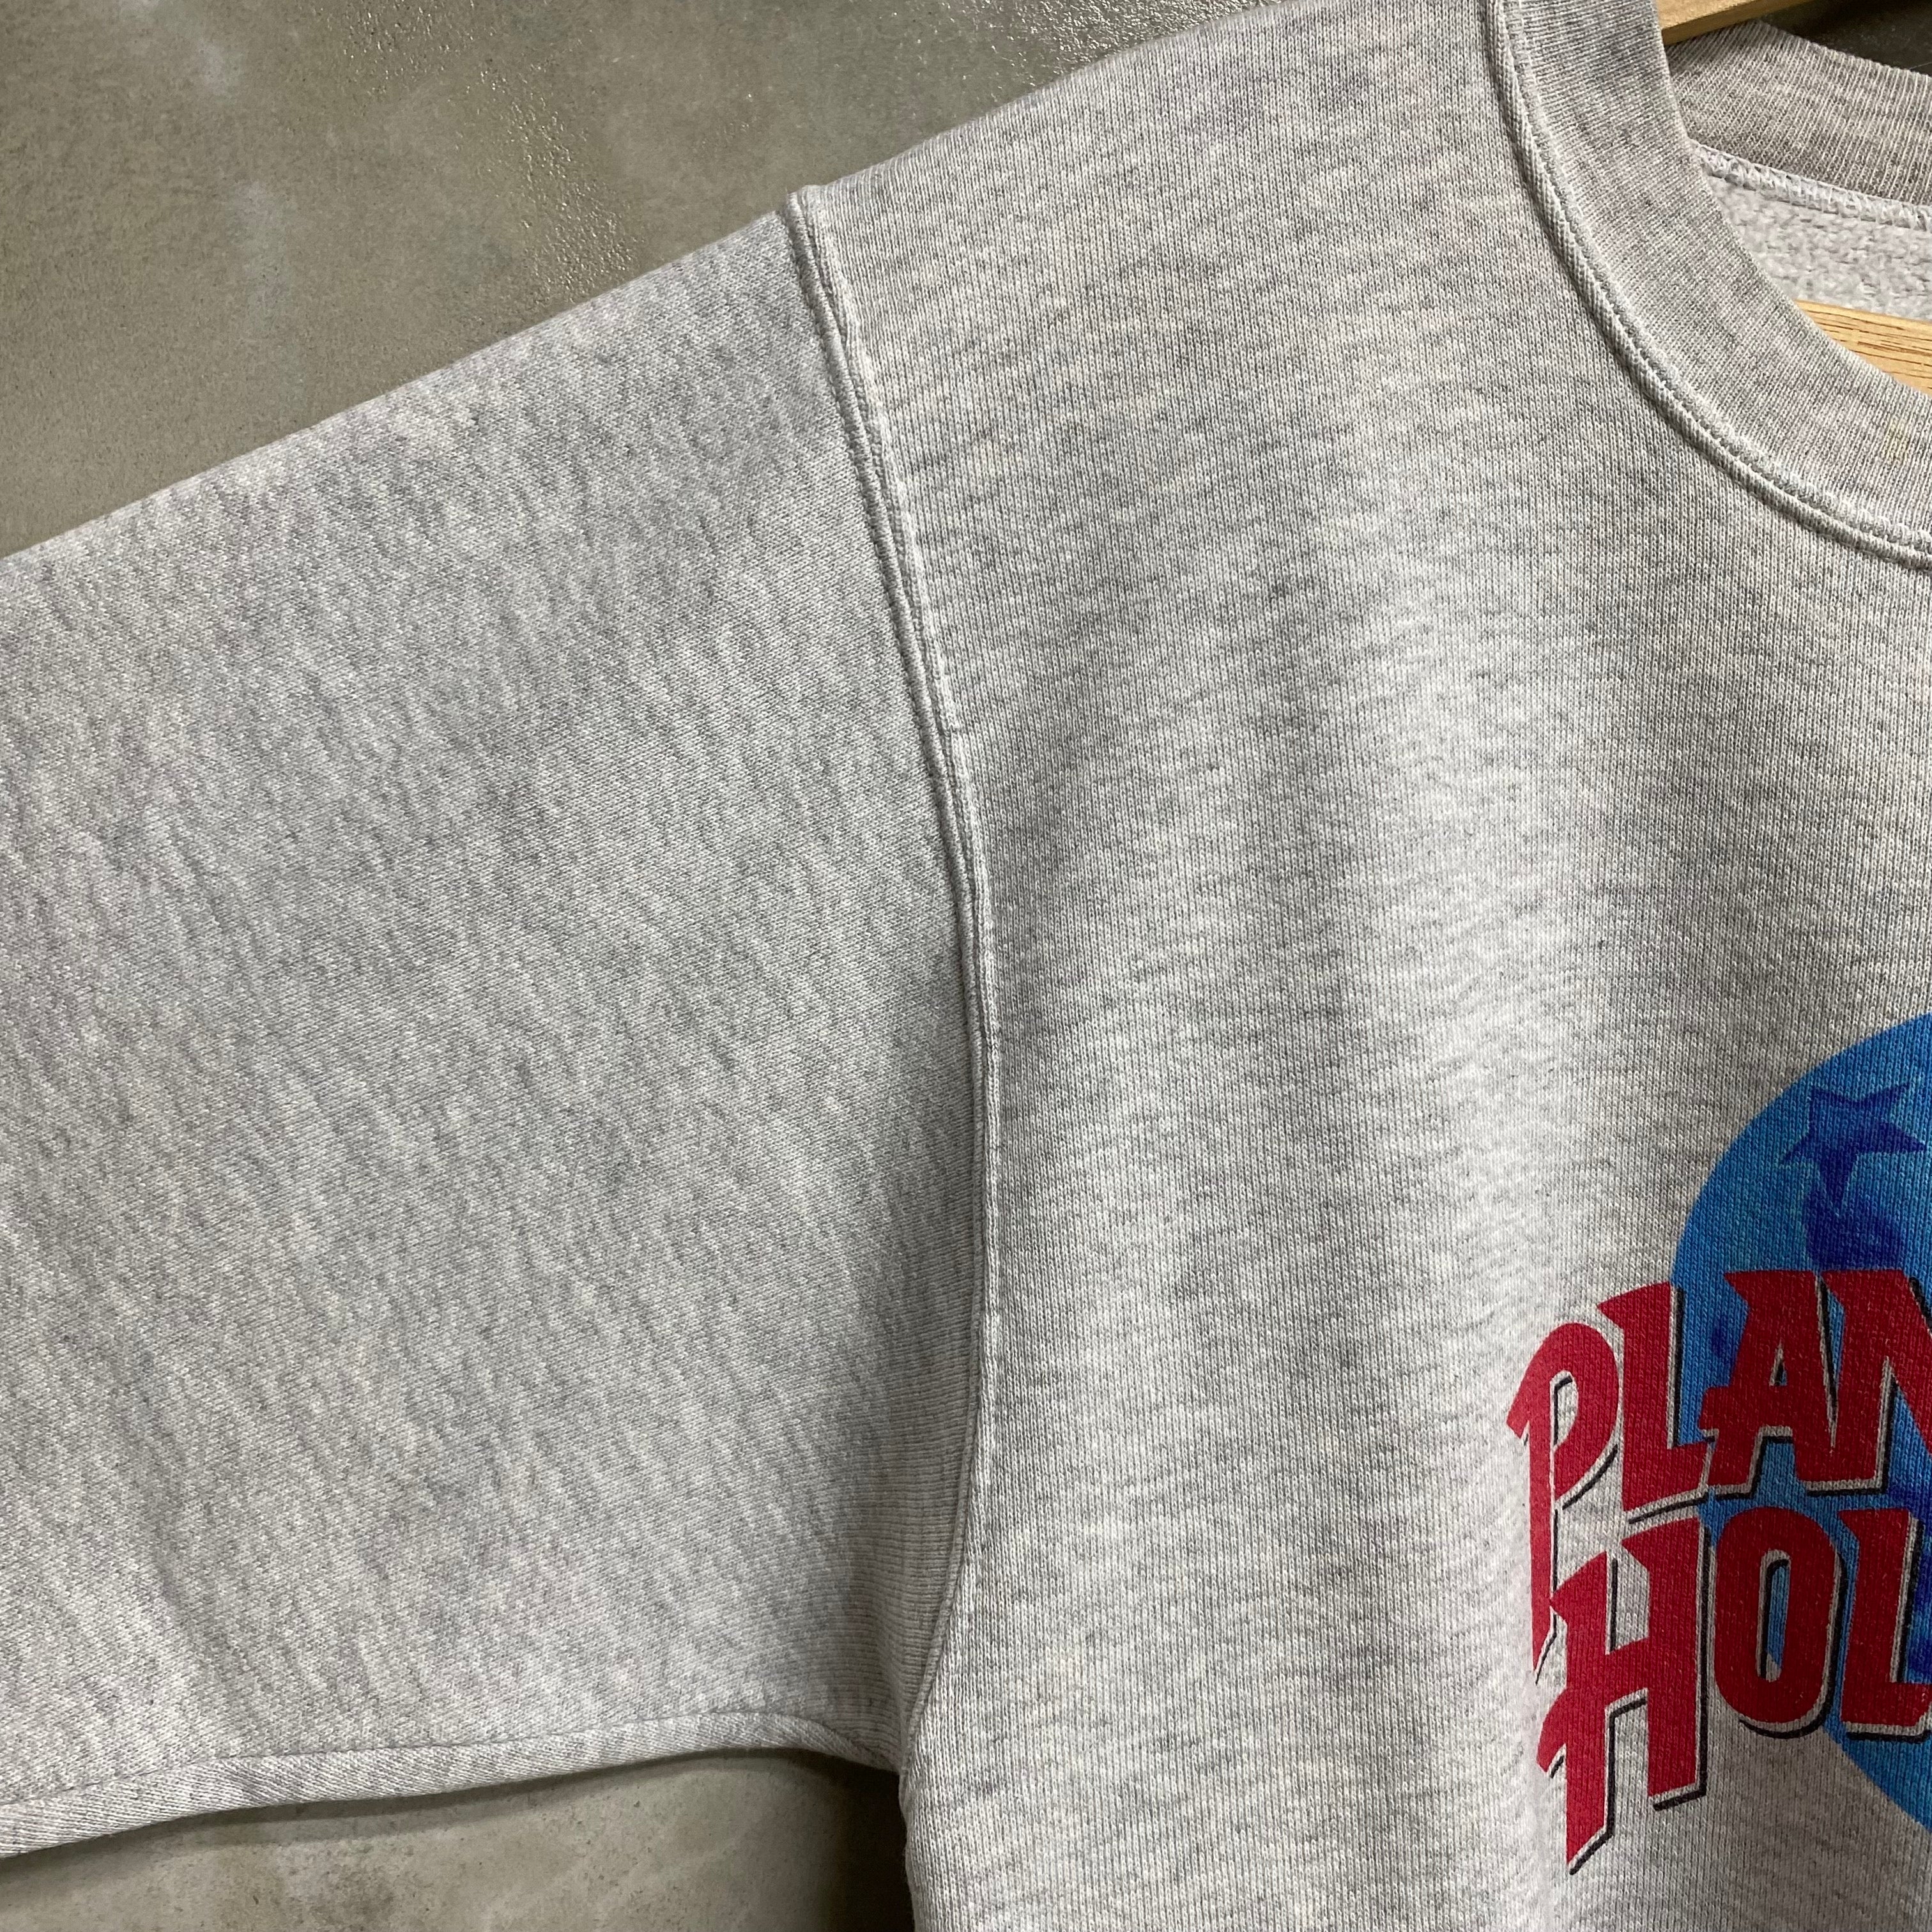 [ ONLY ONE ! ] PLANET HOLLYWOOD 90's SWEAT SHIRTS / Mr.Clean Select